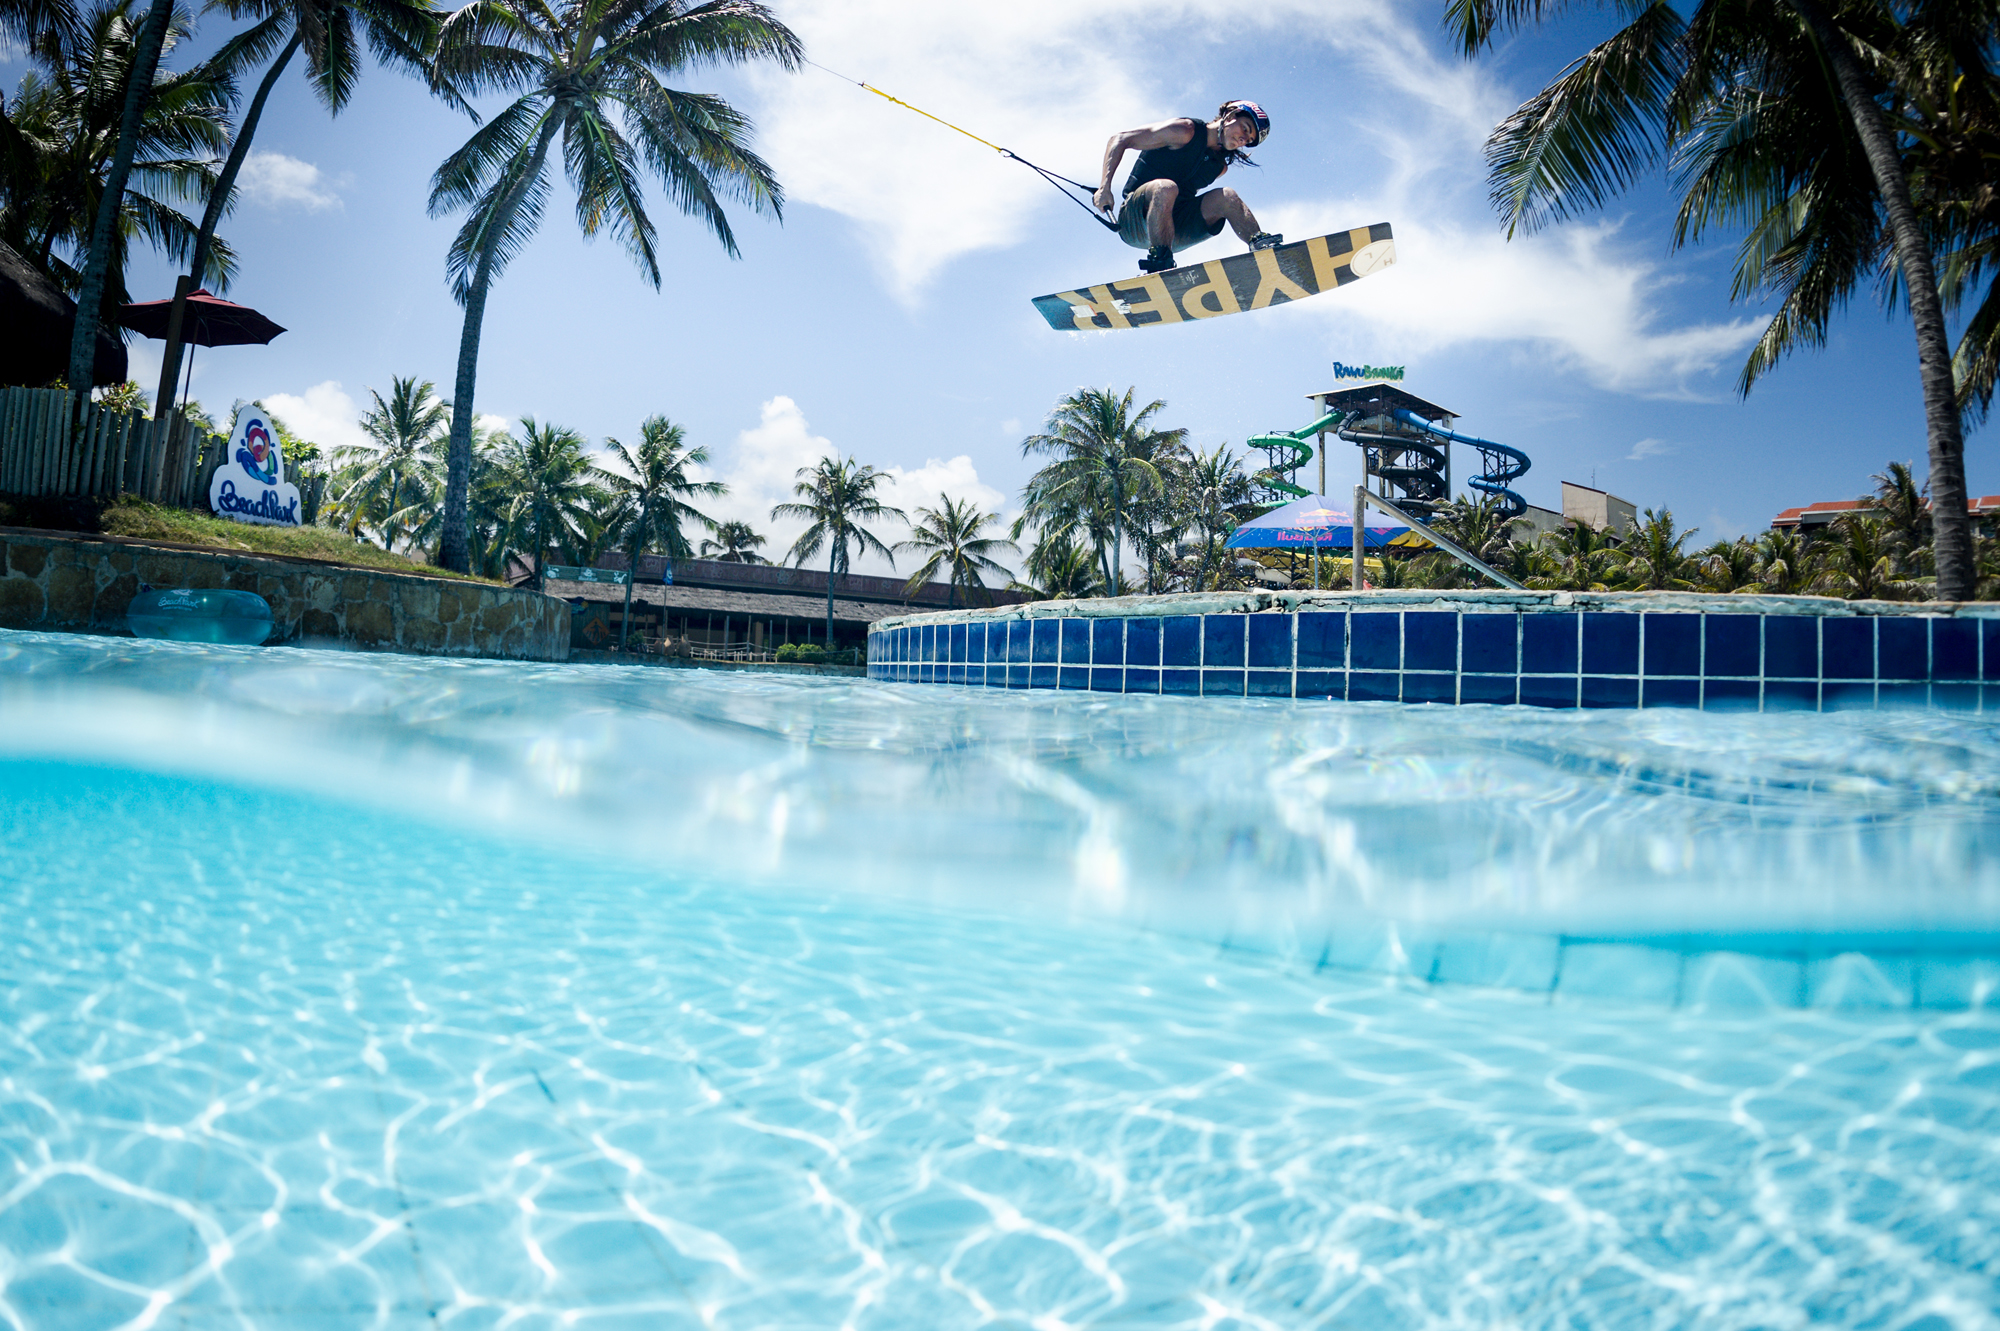 Watch Professional Red Bull Wakeboarder Pedro Caldas Take on 82-Foot Water Slide in Beach Park!